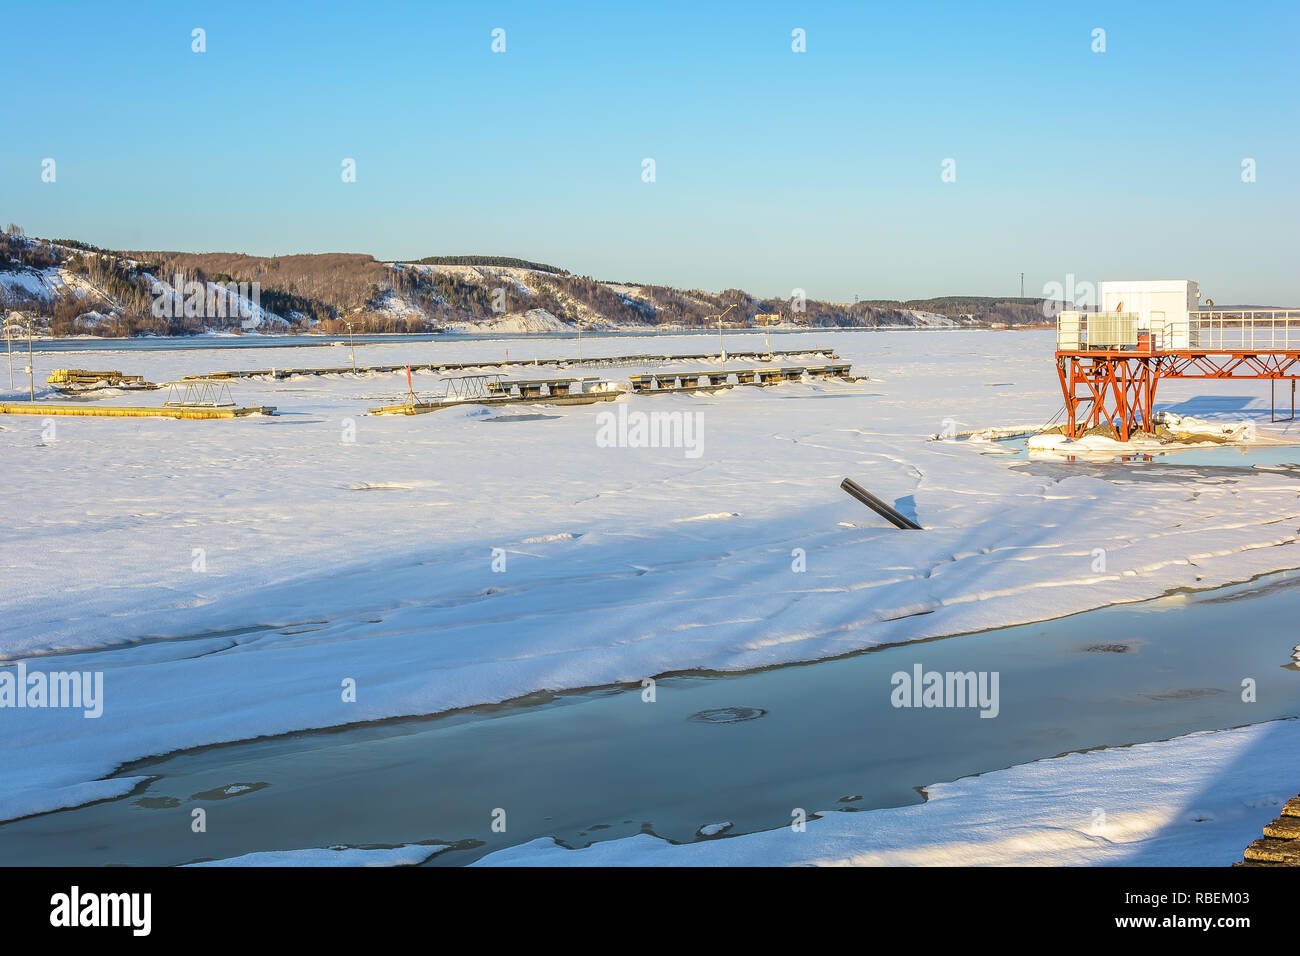 Melting of ice on the river in early spring under the warm rays of the sun Stock Photo